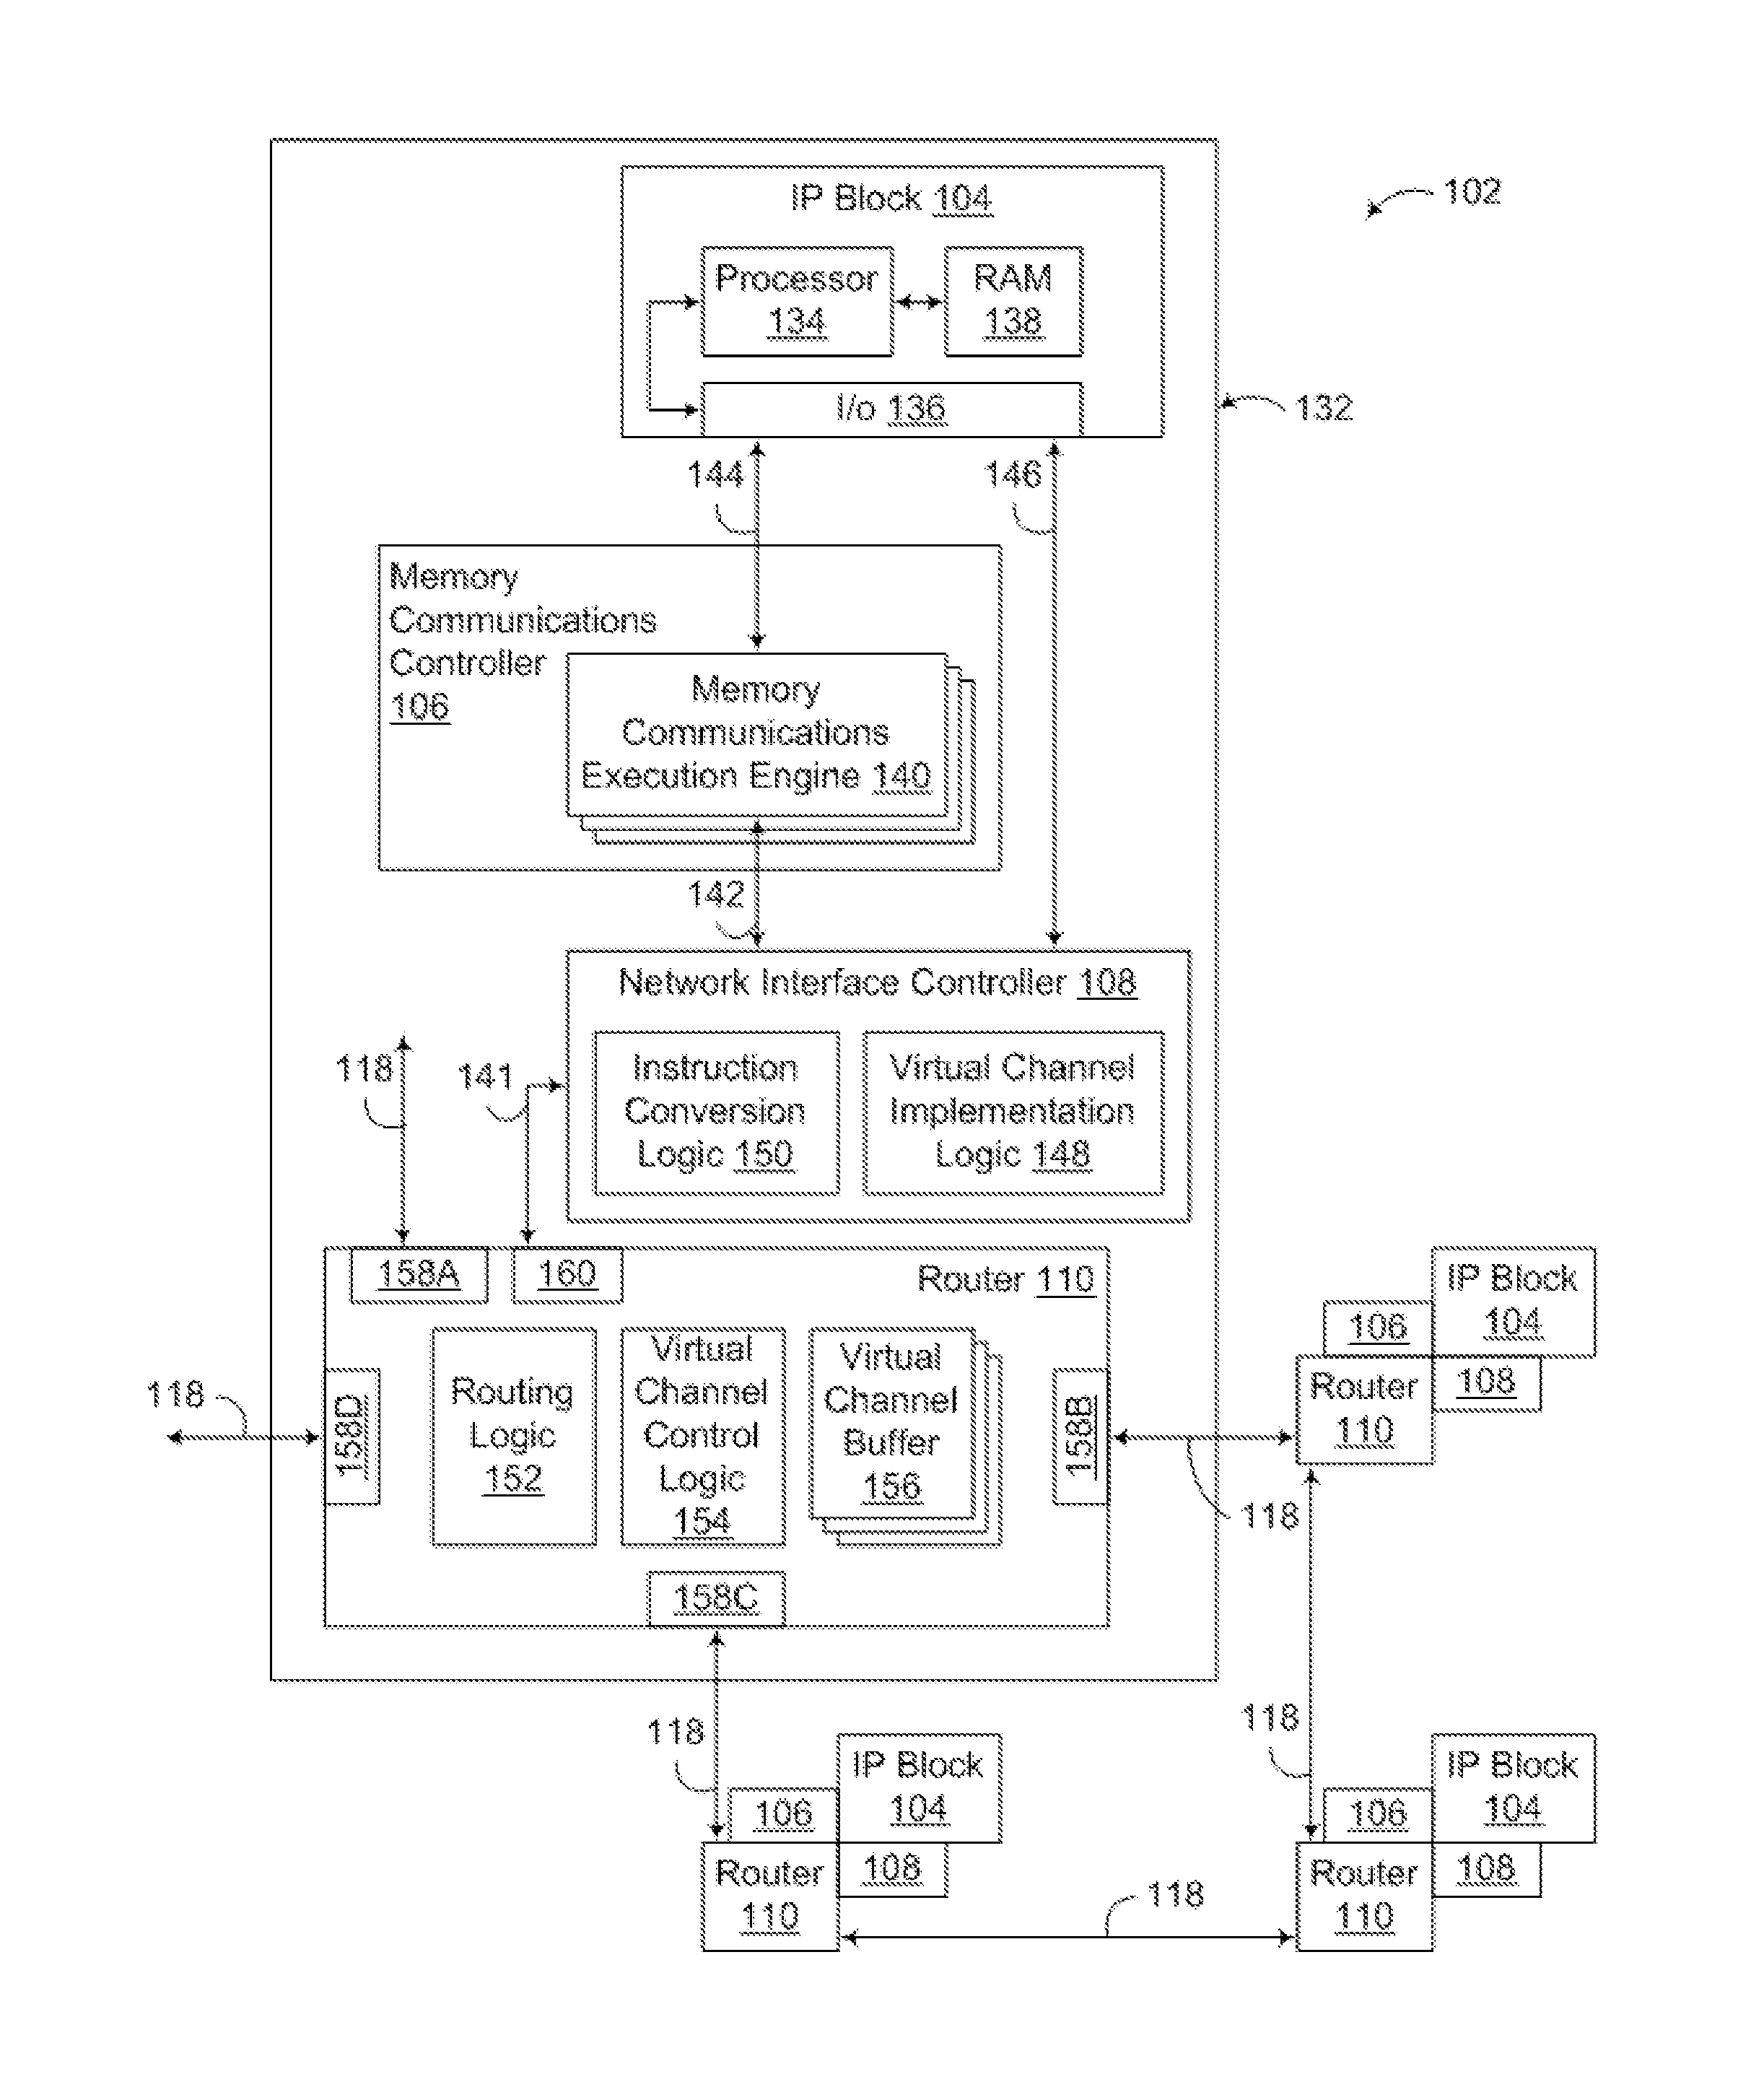 General purpose processing unit with low power digital signal processing (DSP) mode